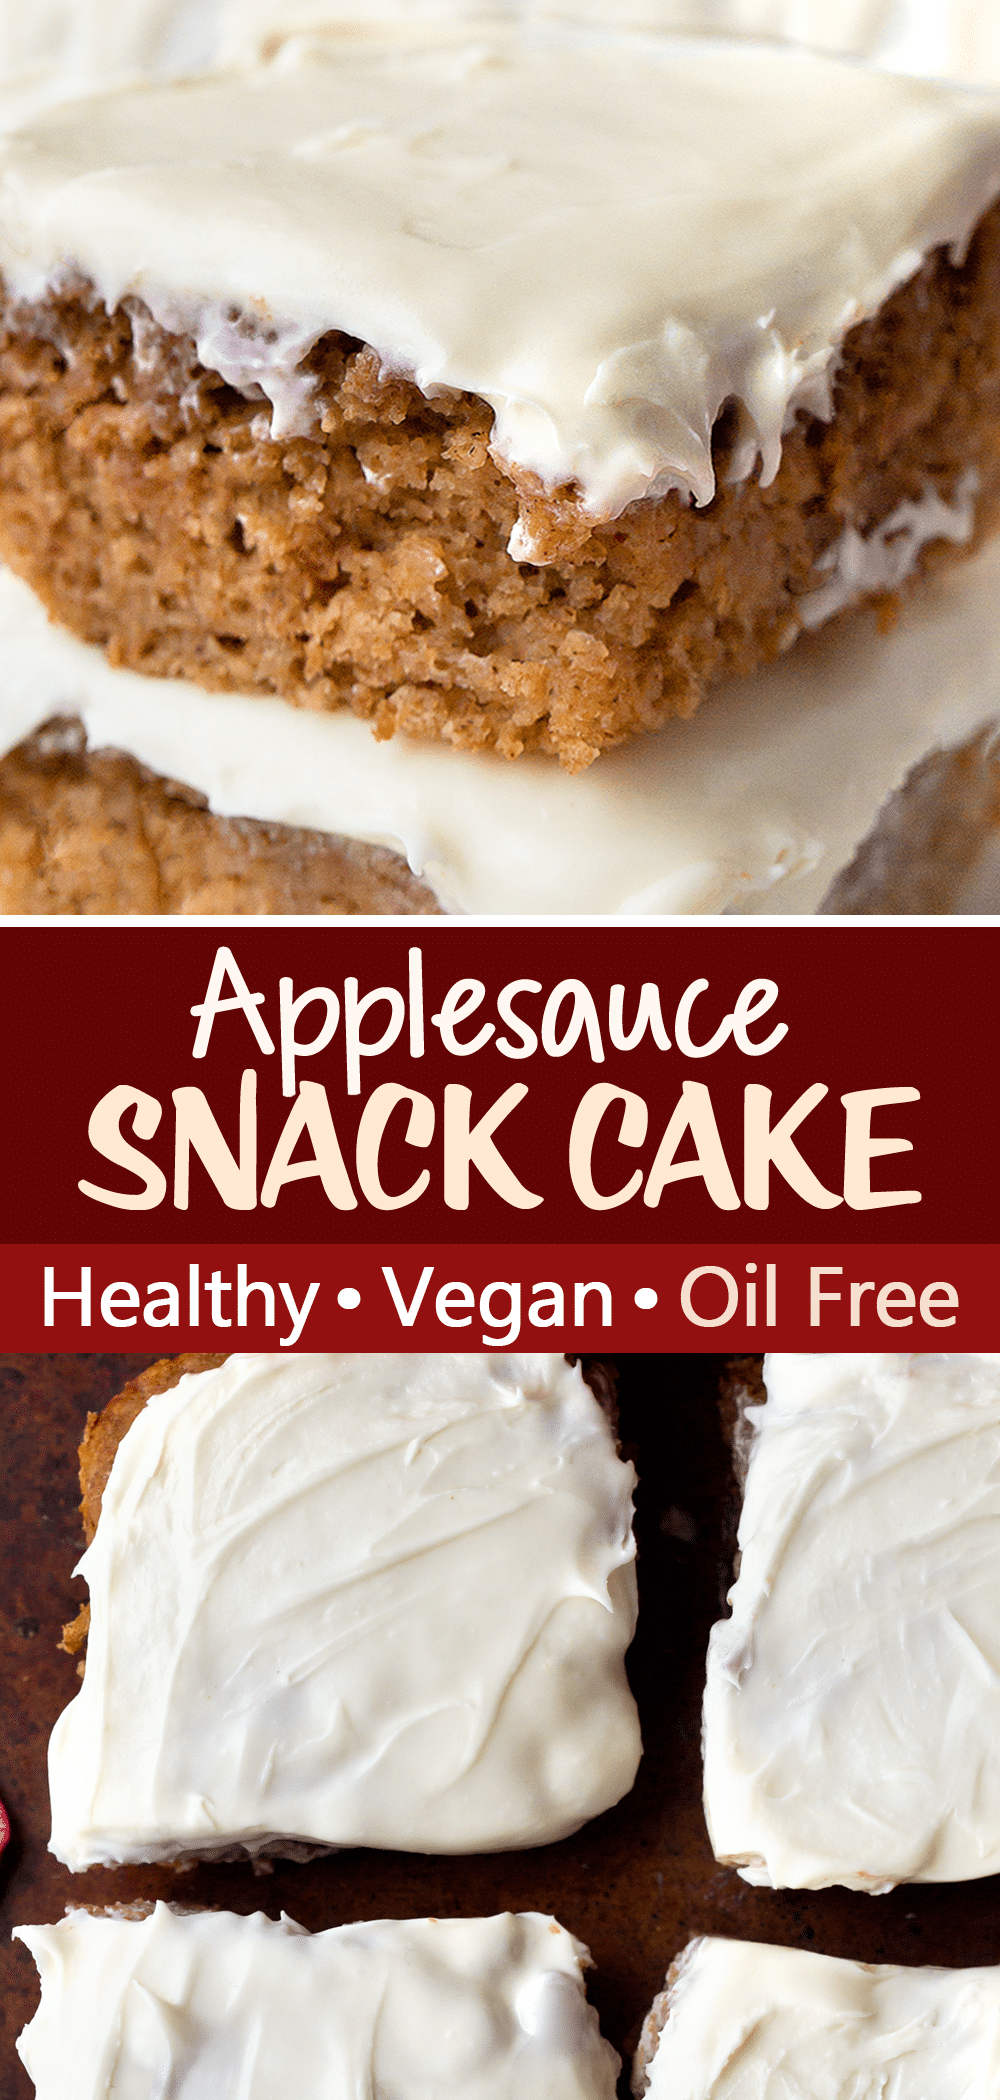 How To Make A Healthy Applesauce Cake